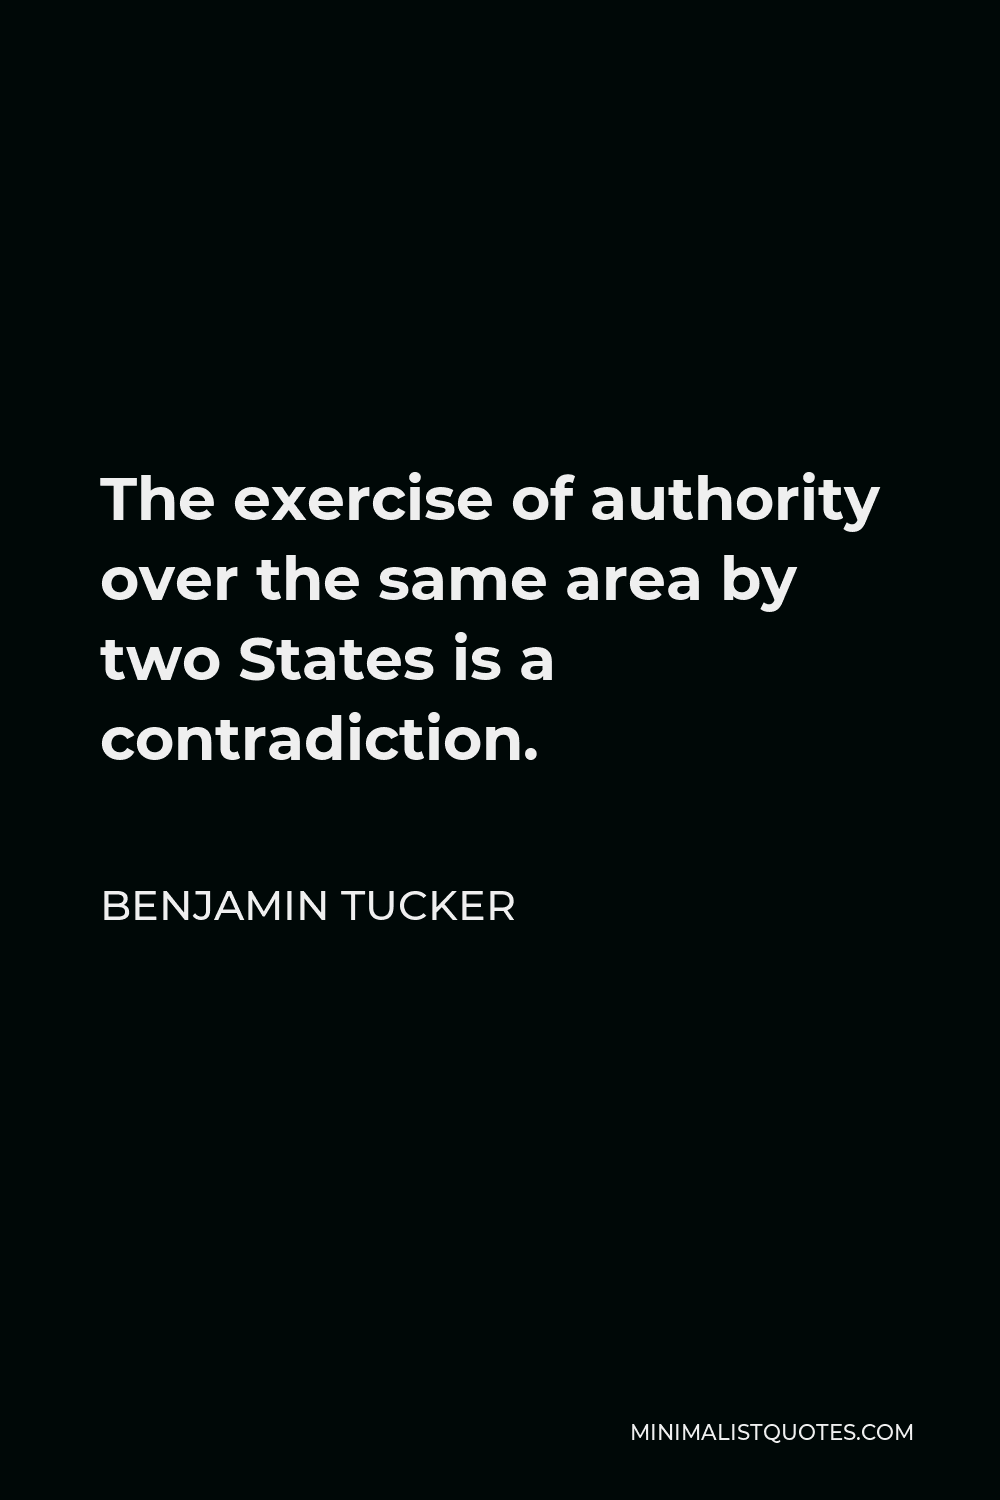 Benjamin Tucker Quote - The exercise of authority over the same area by two States is a contradiction.